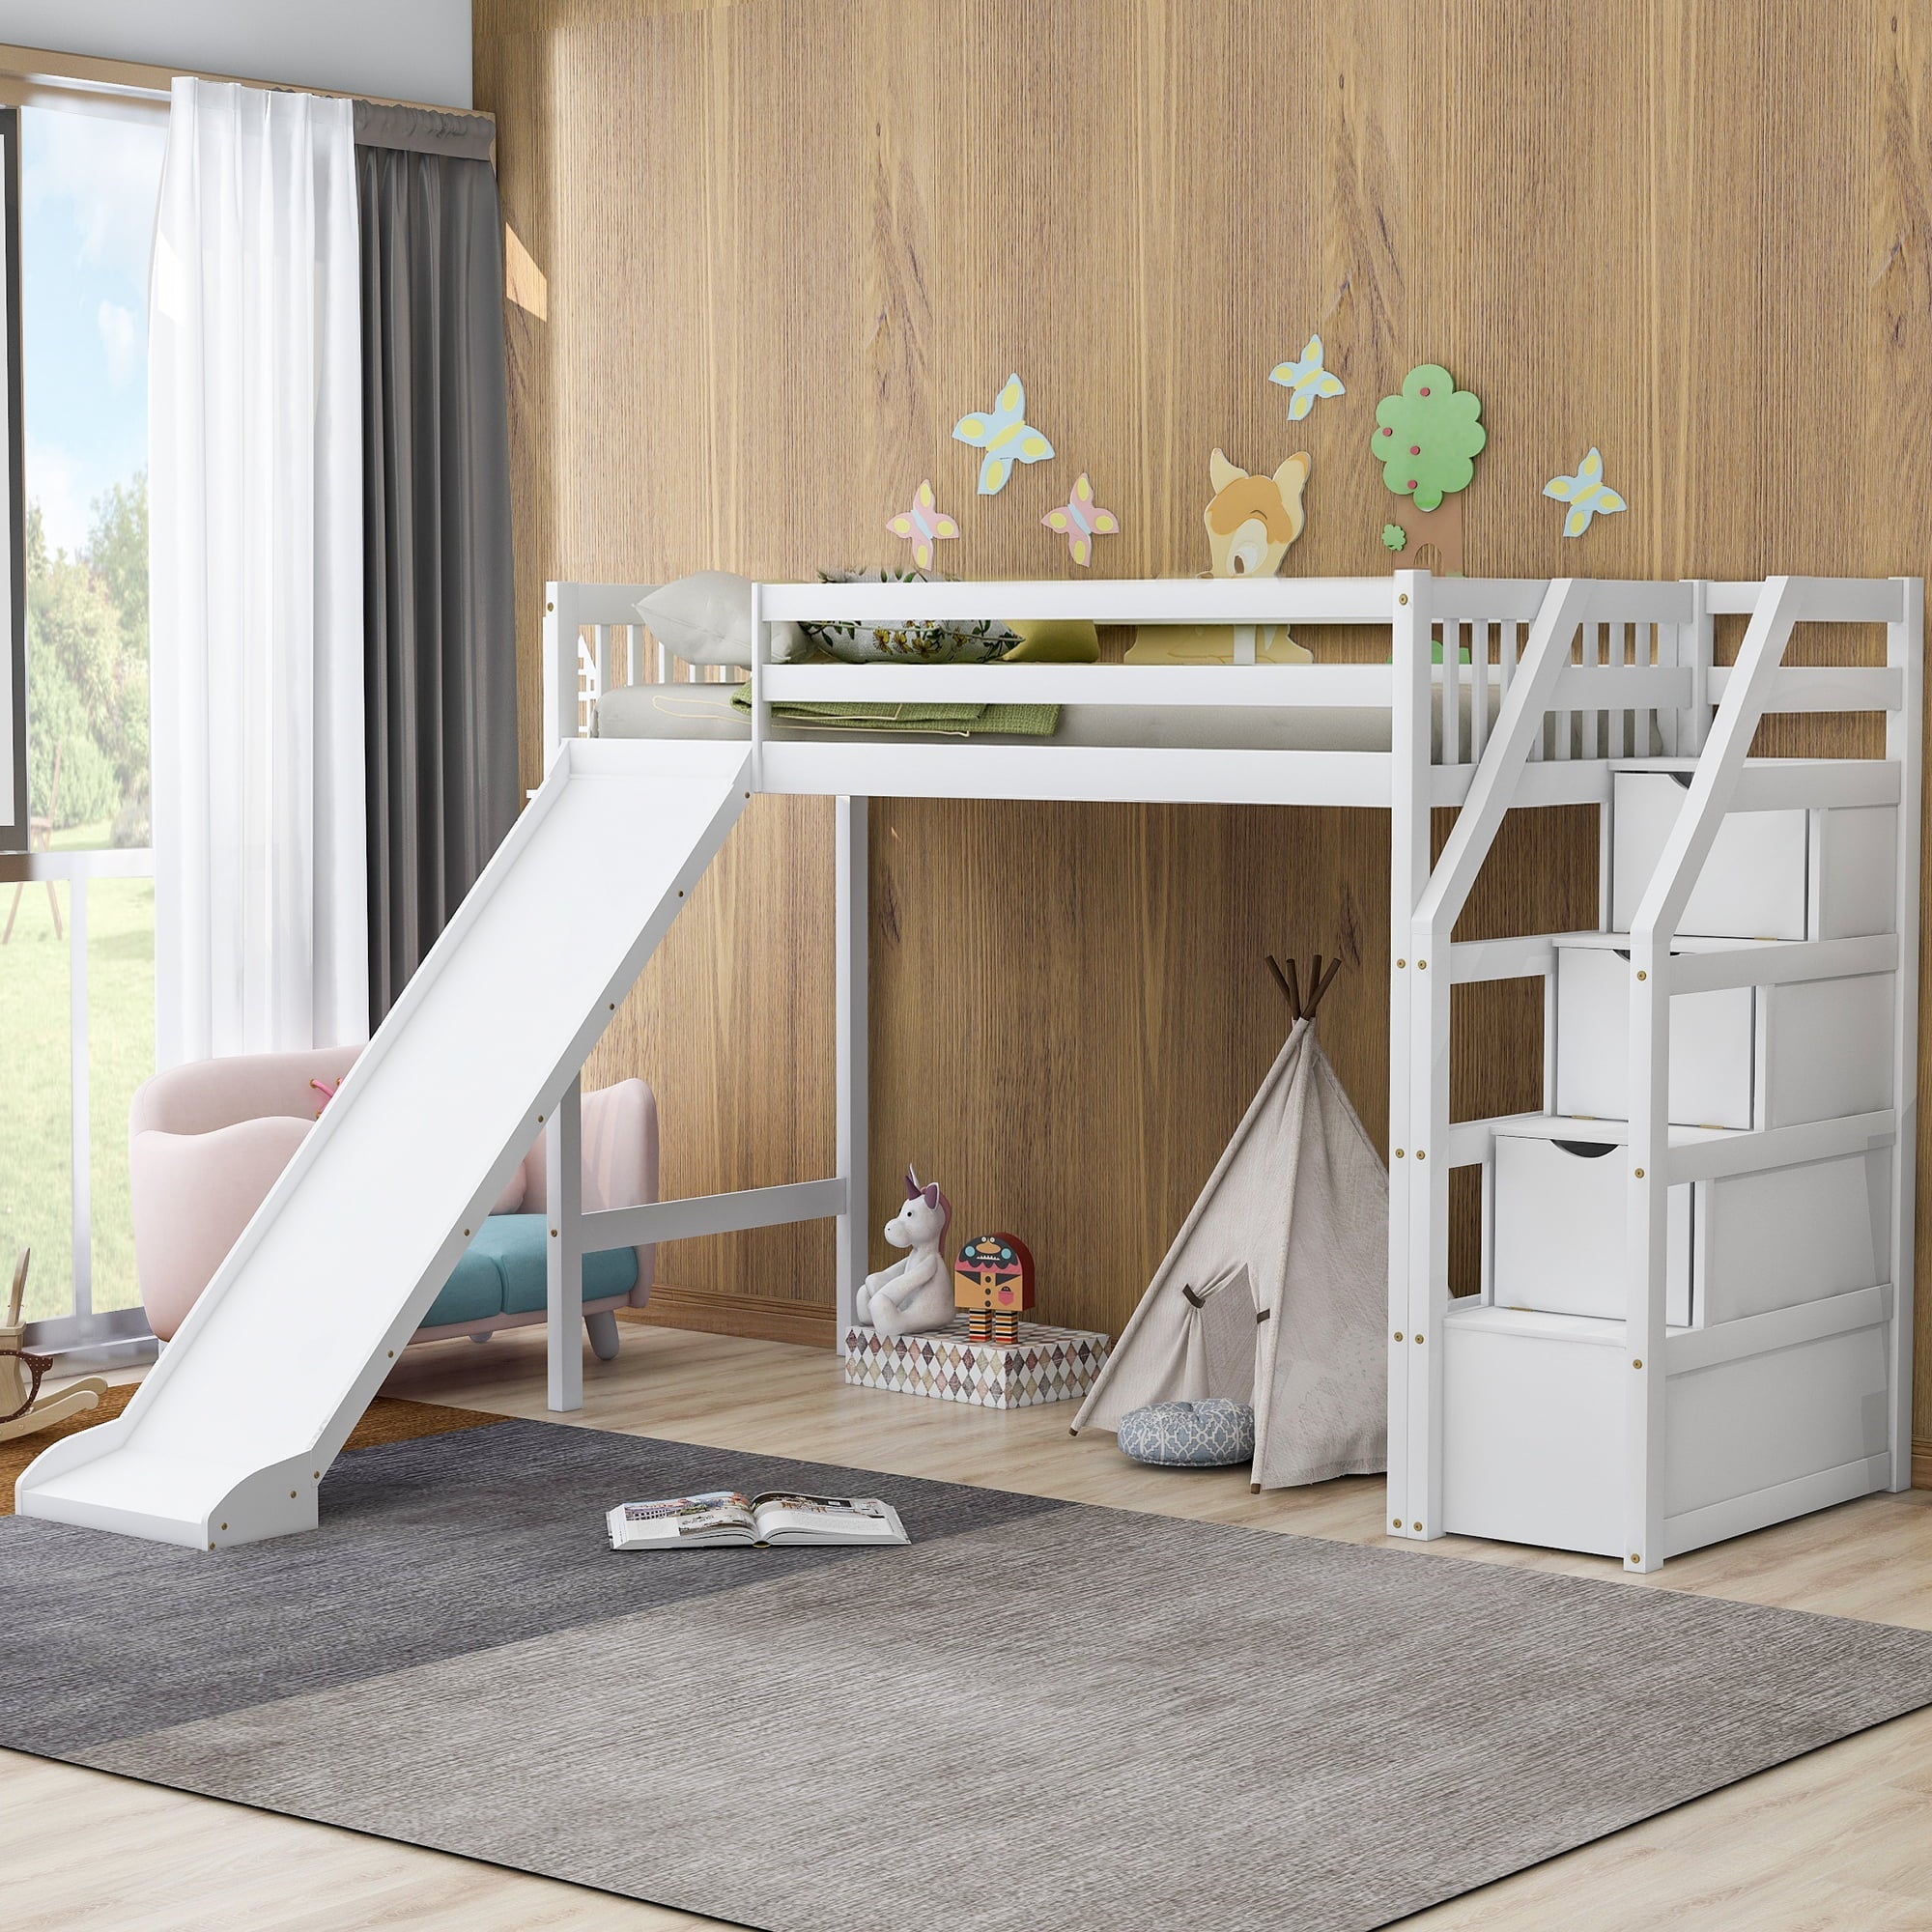 Euroco Wood Twin Size Loft Bed with Slide and Drawers for Child, White